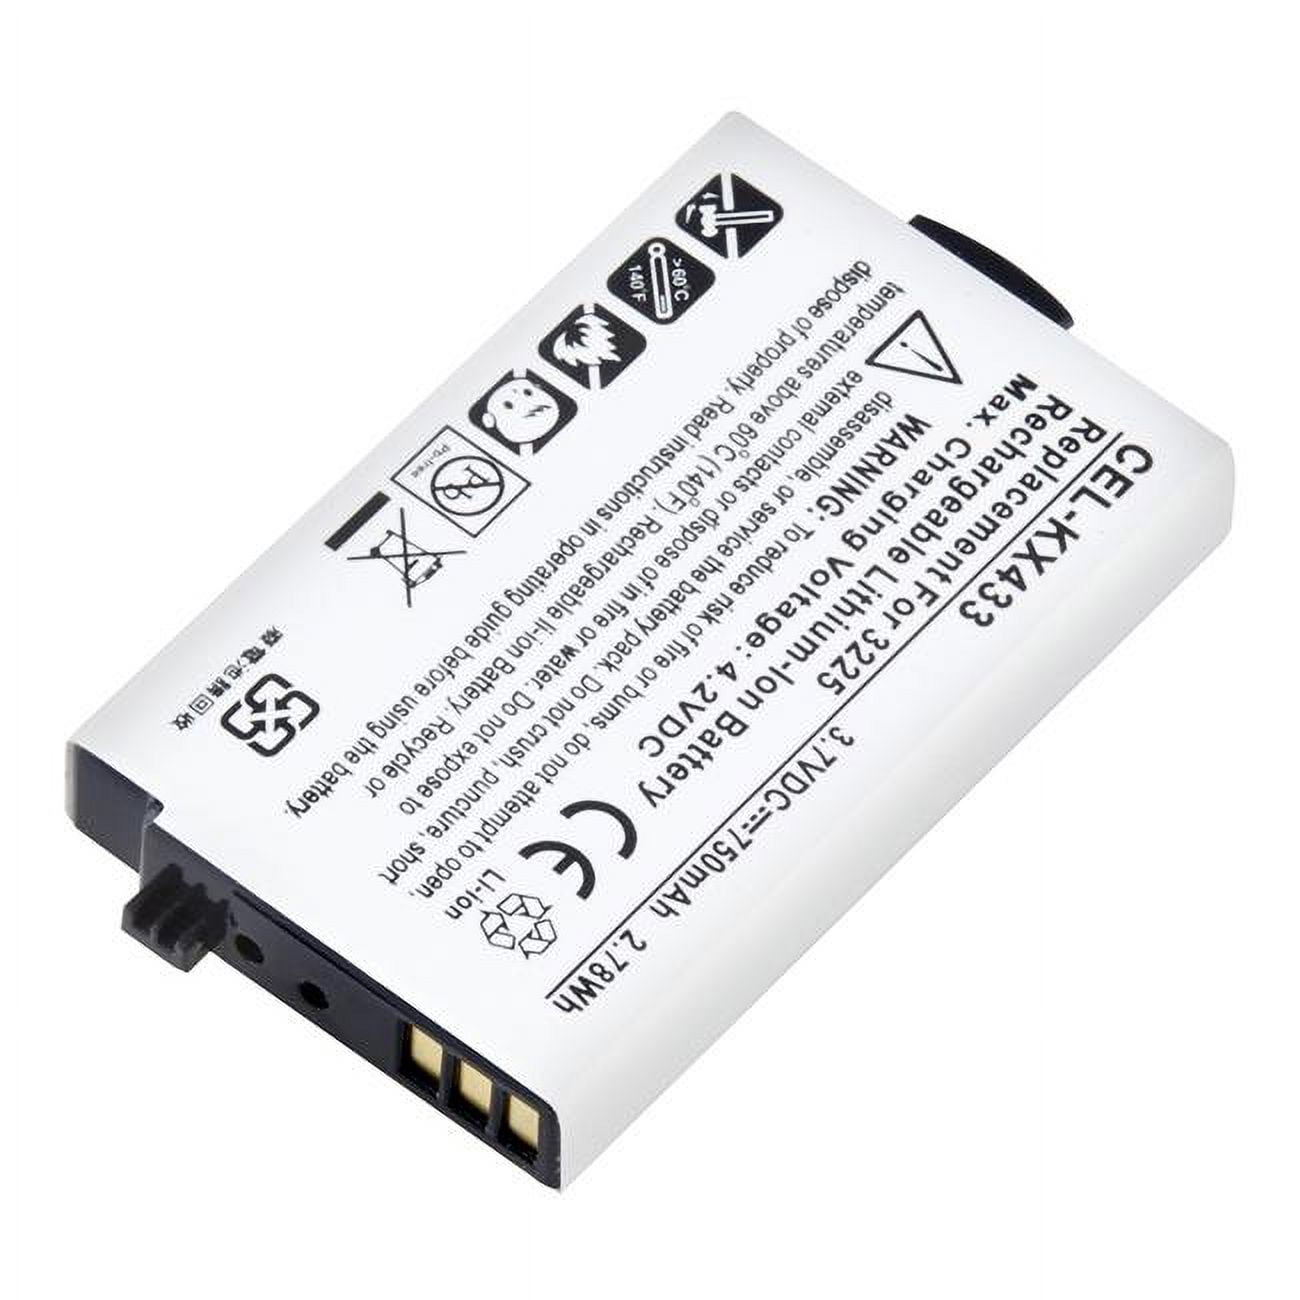 Picture of Ultralast CEL-KX433 3.7V & 850 mAh Replacement Lithium-Ion Battery for Kyocera 3225 Cellular Phone